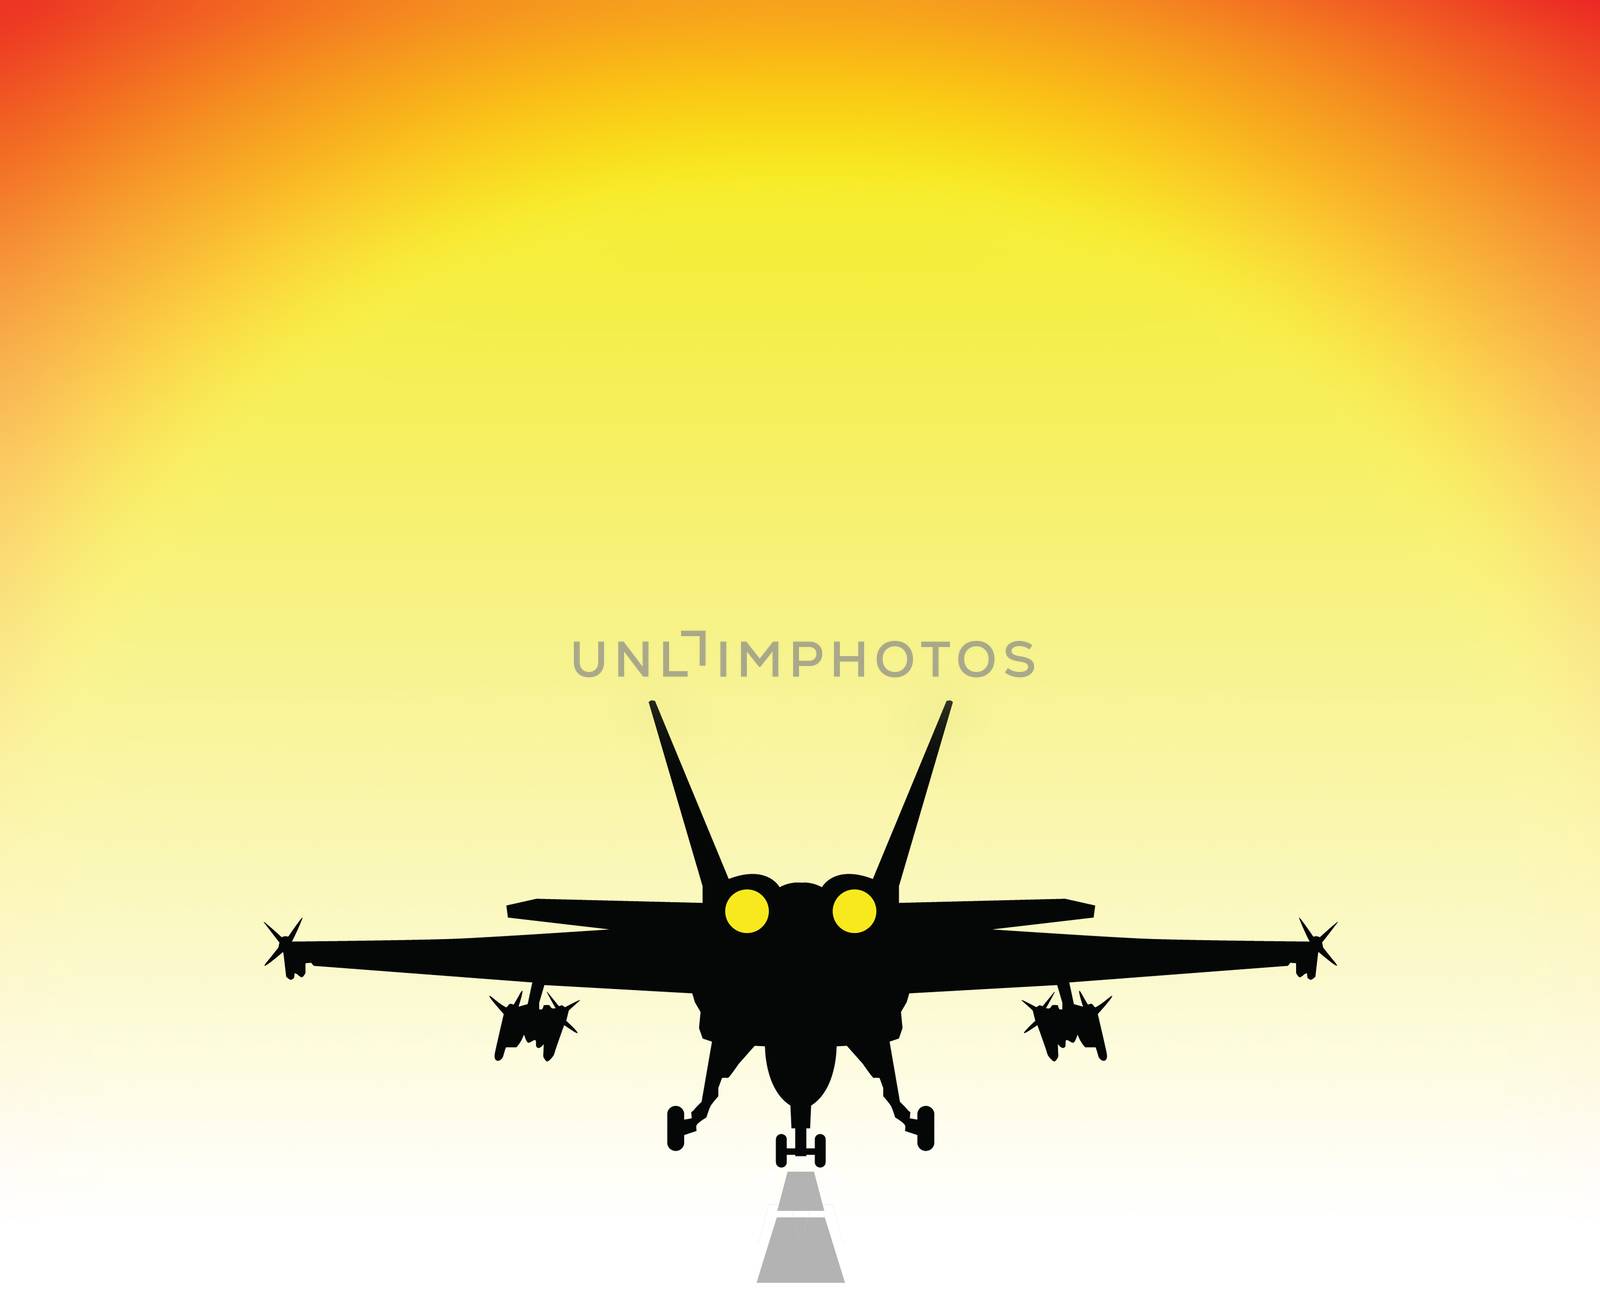 millitary jet fighter silhouette and sunrise illustration